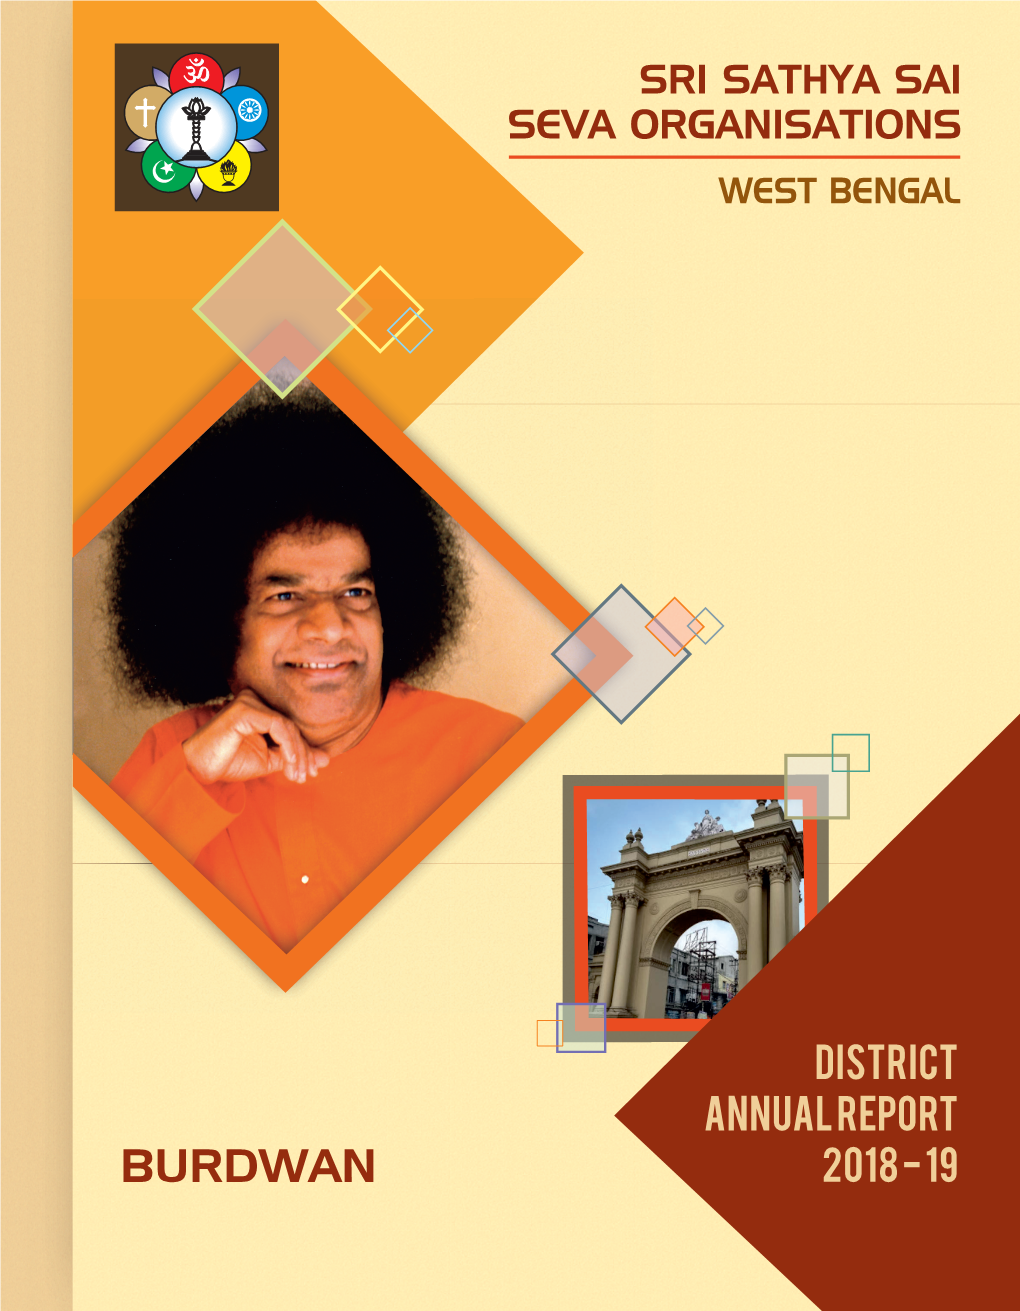 Burdwan District of West Bengal, Are Enthused Seva During the Allotted Periods in the Year